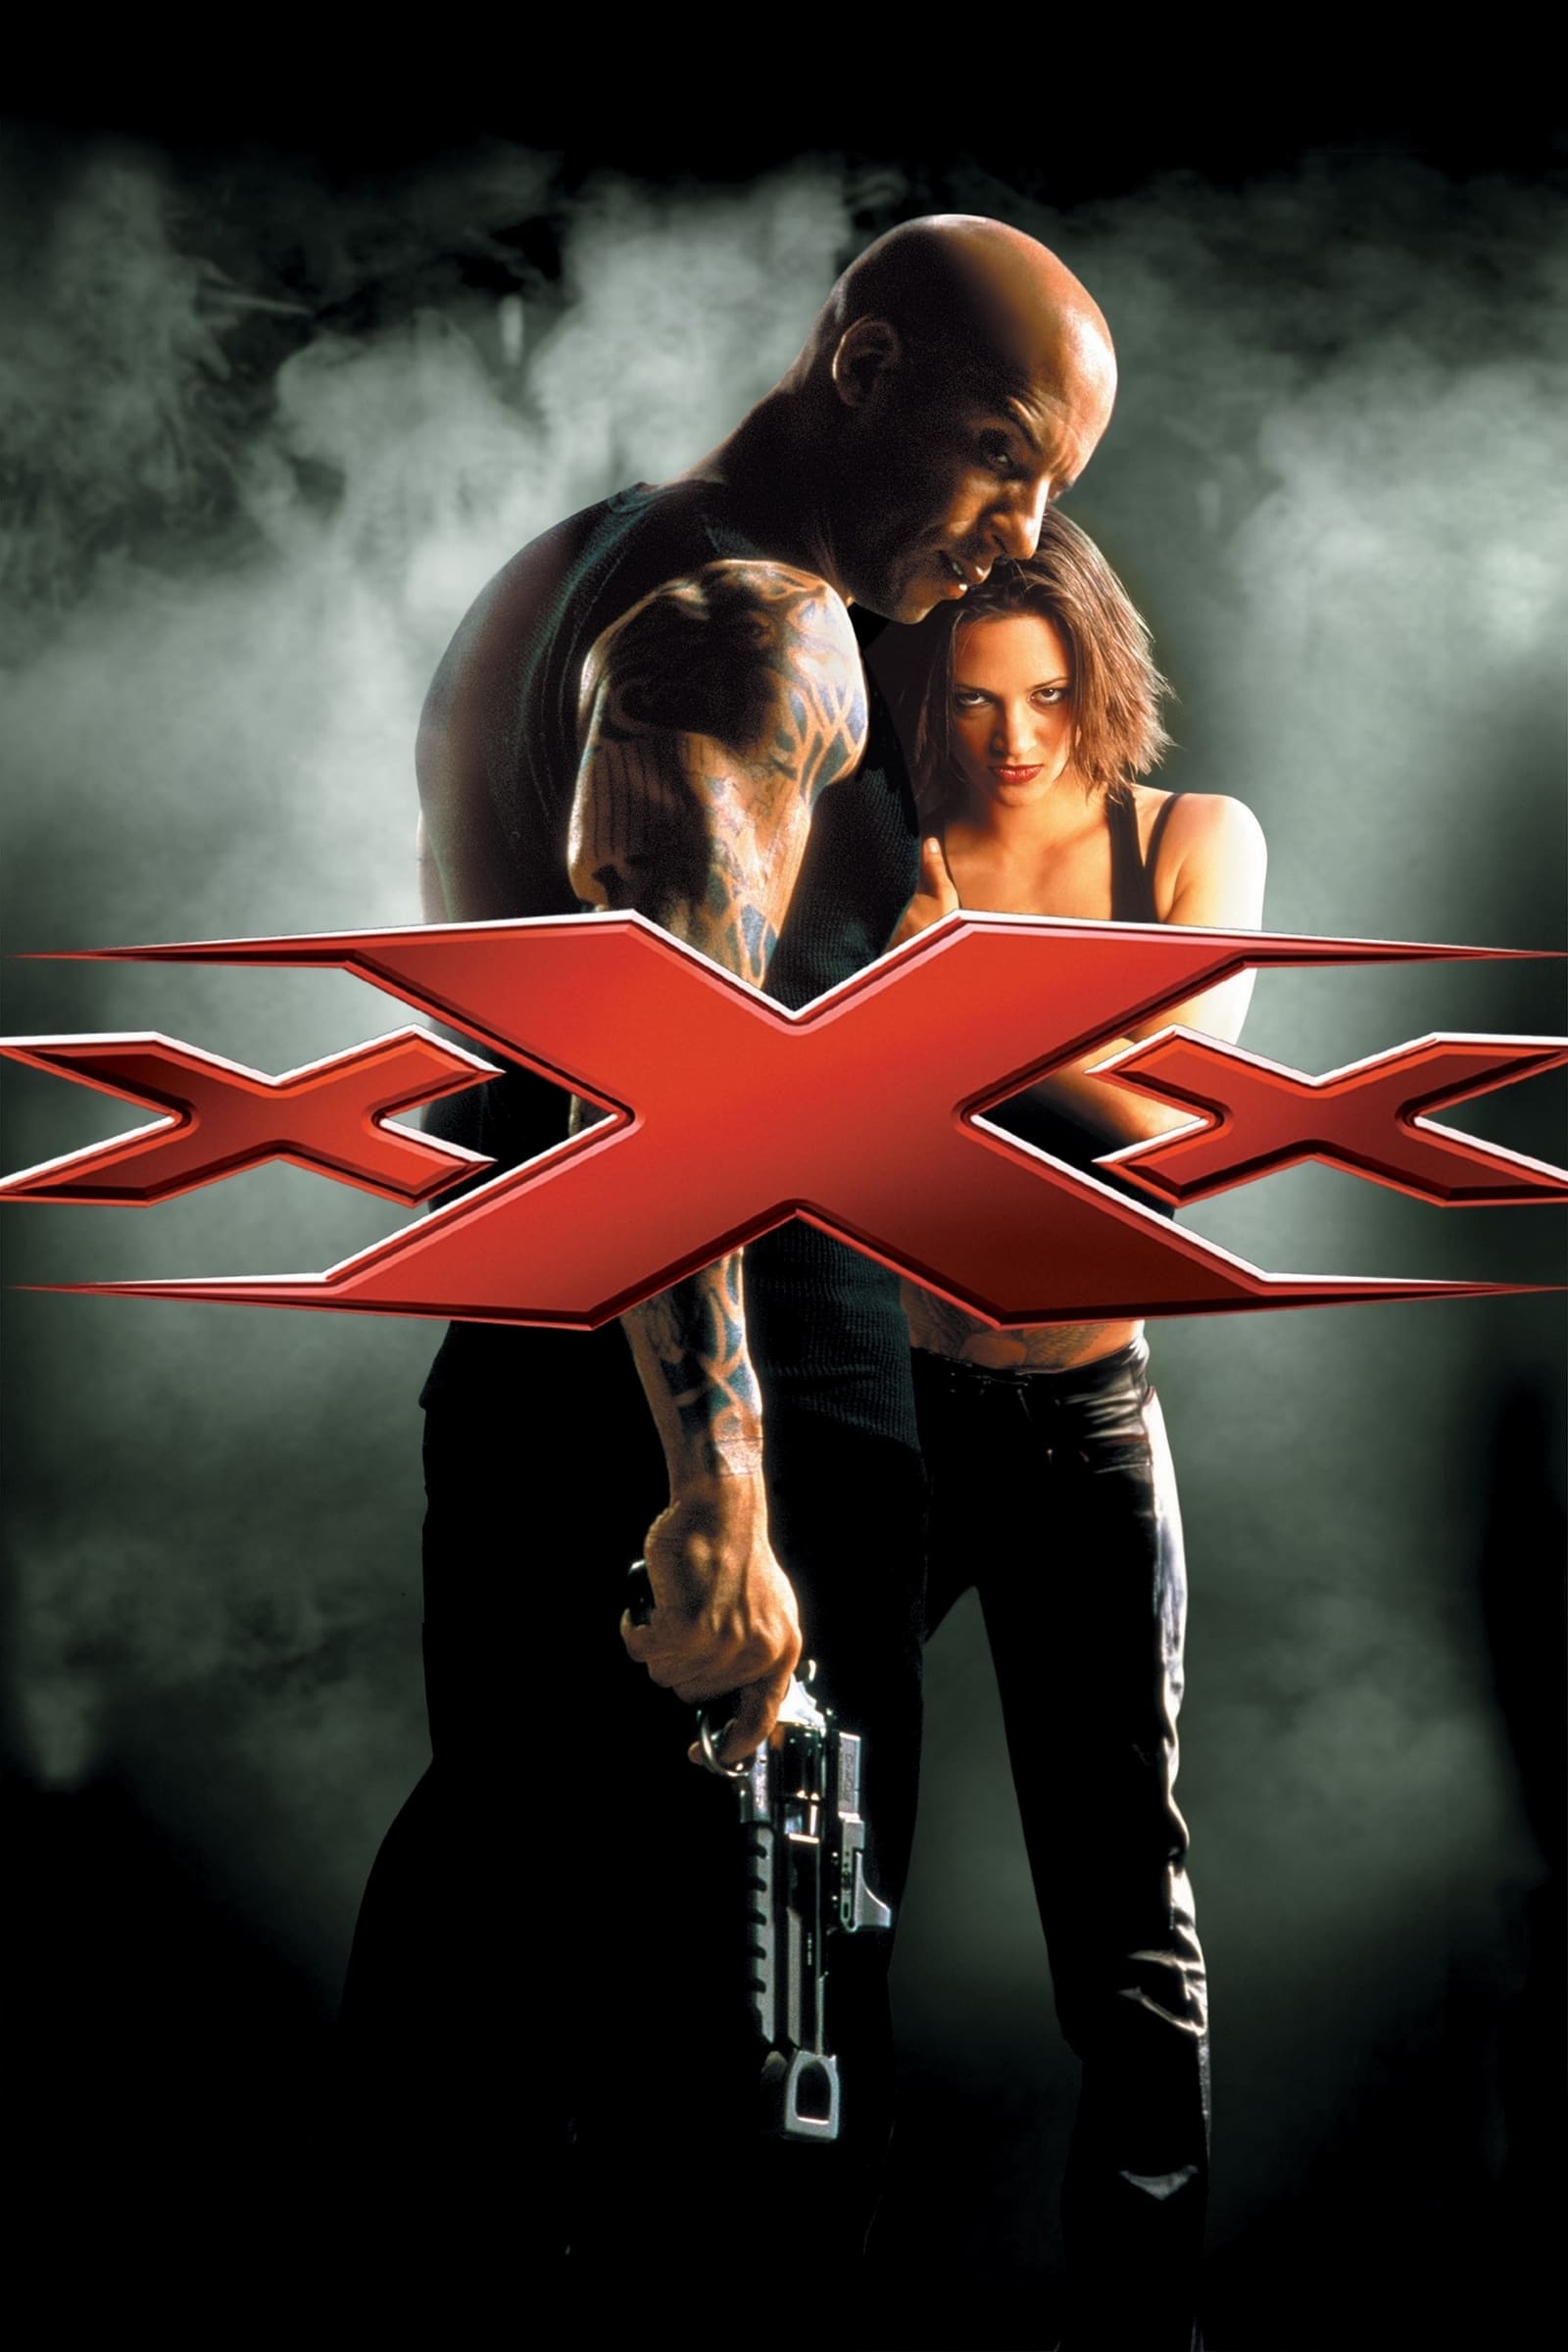 brian campanella recommends how many xxx movies pic